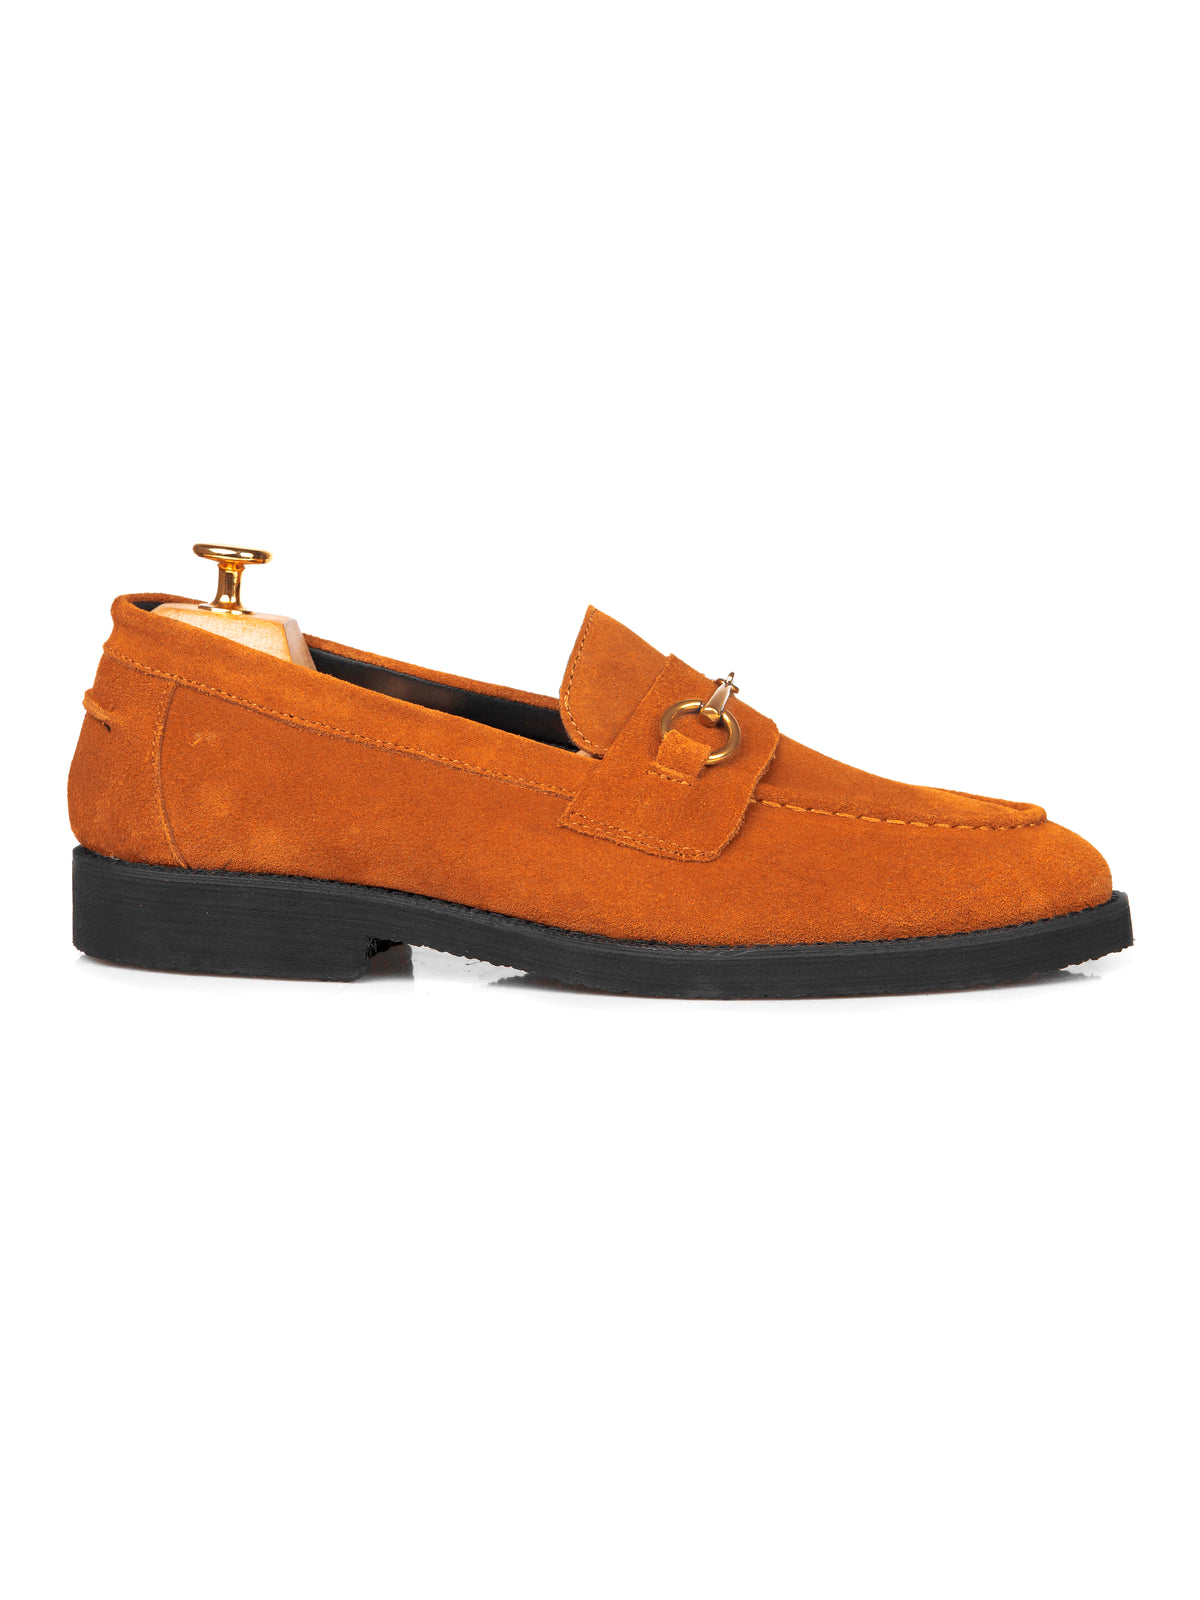 Penny Loafer Horsebit Buckle - Tangerine Suede Leather (Crepe Sole ...